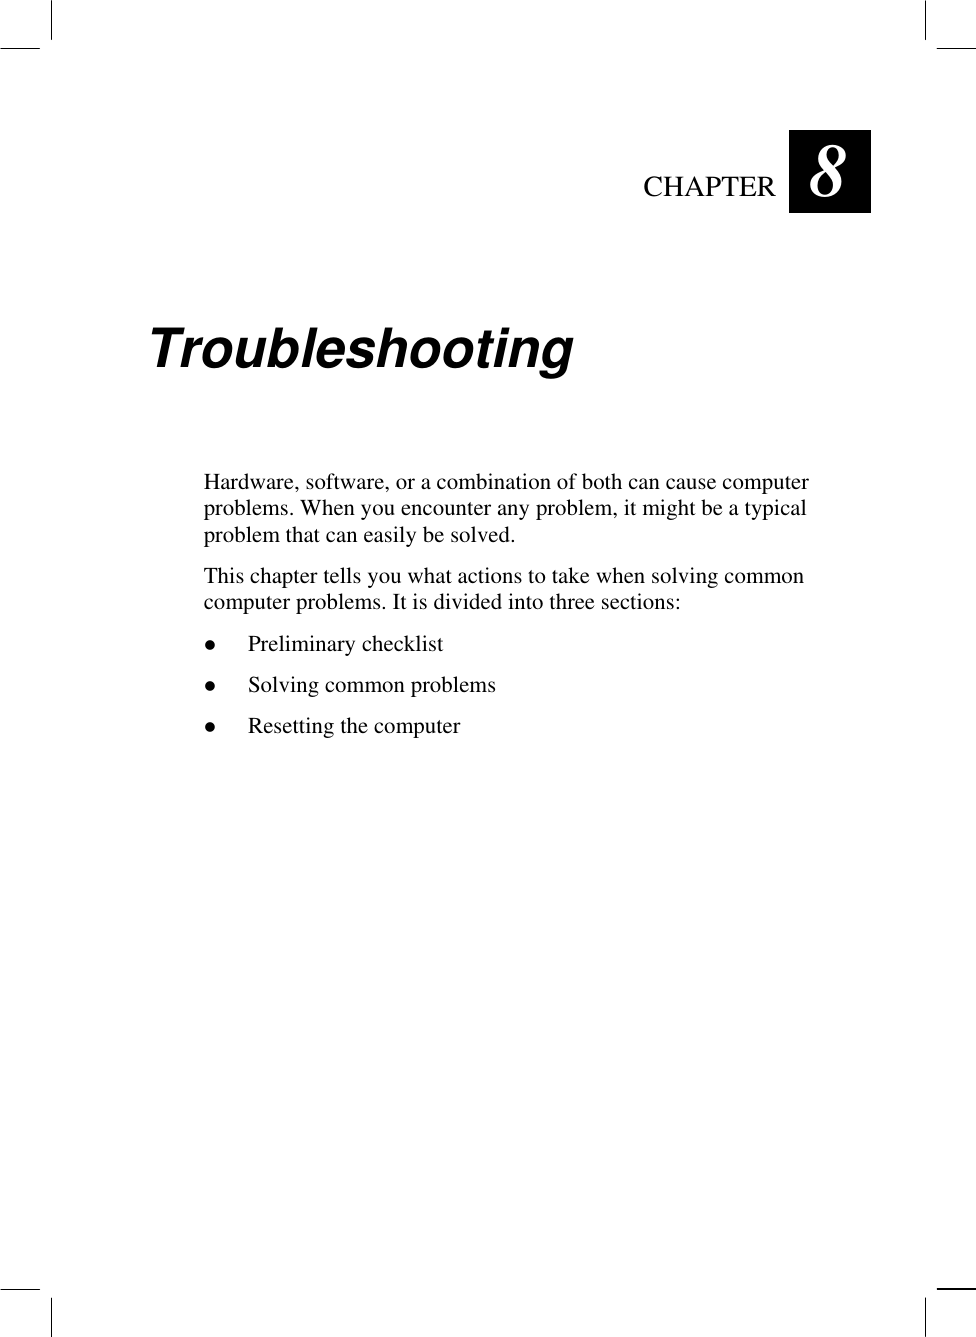   CHAPTER  8 Troubleshooting Hardware, software, or a combination of both can cause computer problems. When you encounter any problem, it might be a typical problem that can easily be solved. This chapter tells you what actions to take when solving common computer problems. It is divided into three sections:   Preliminary checklist   Solving common problems   Resetting the computer 